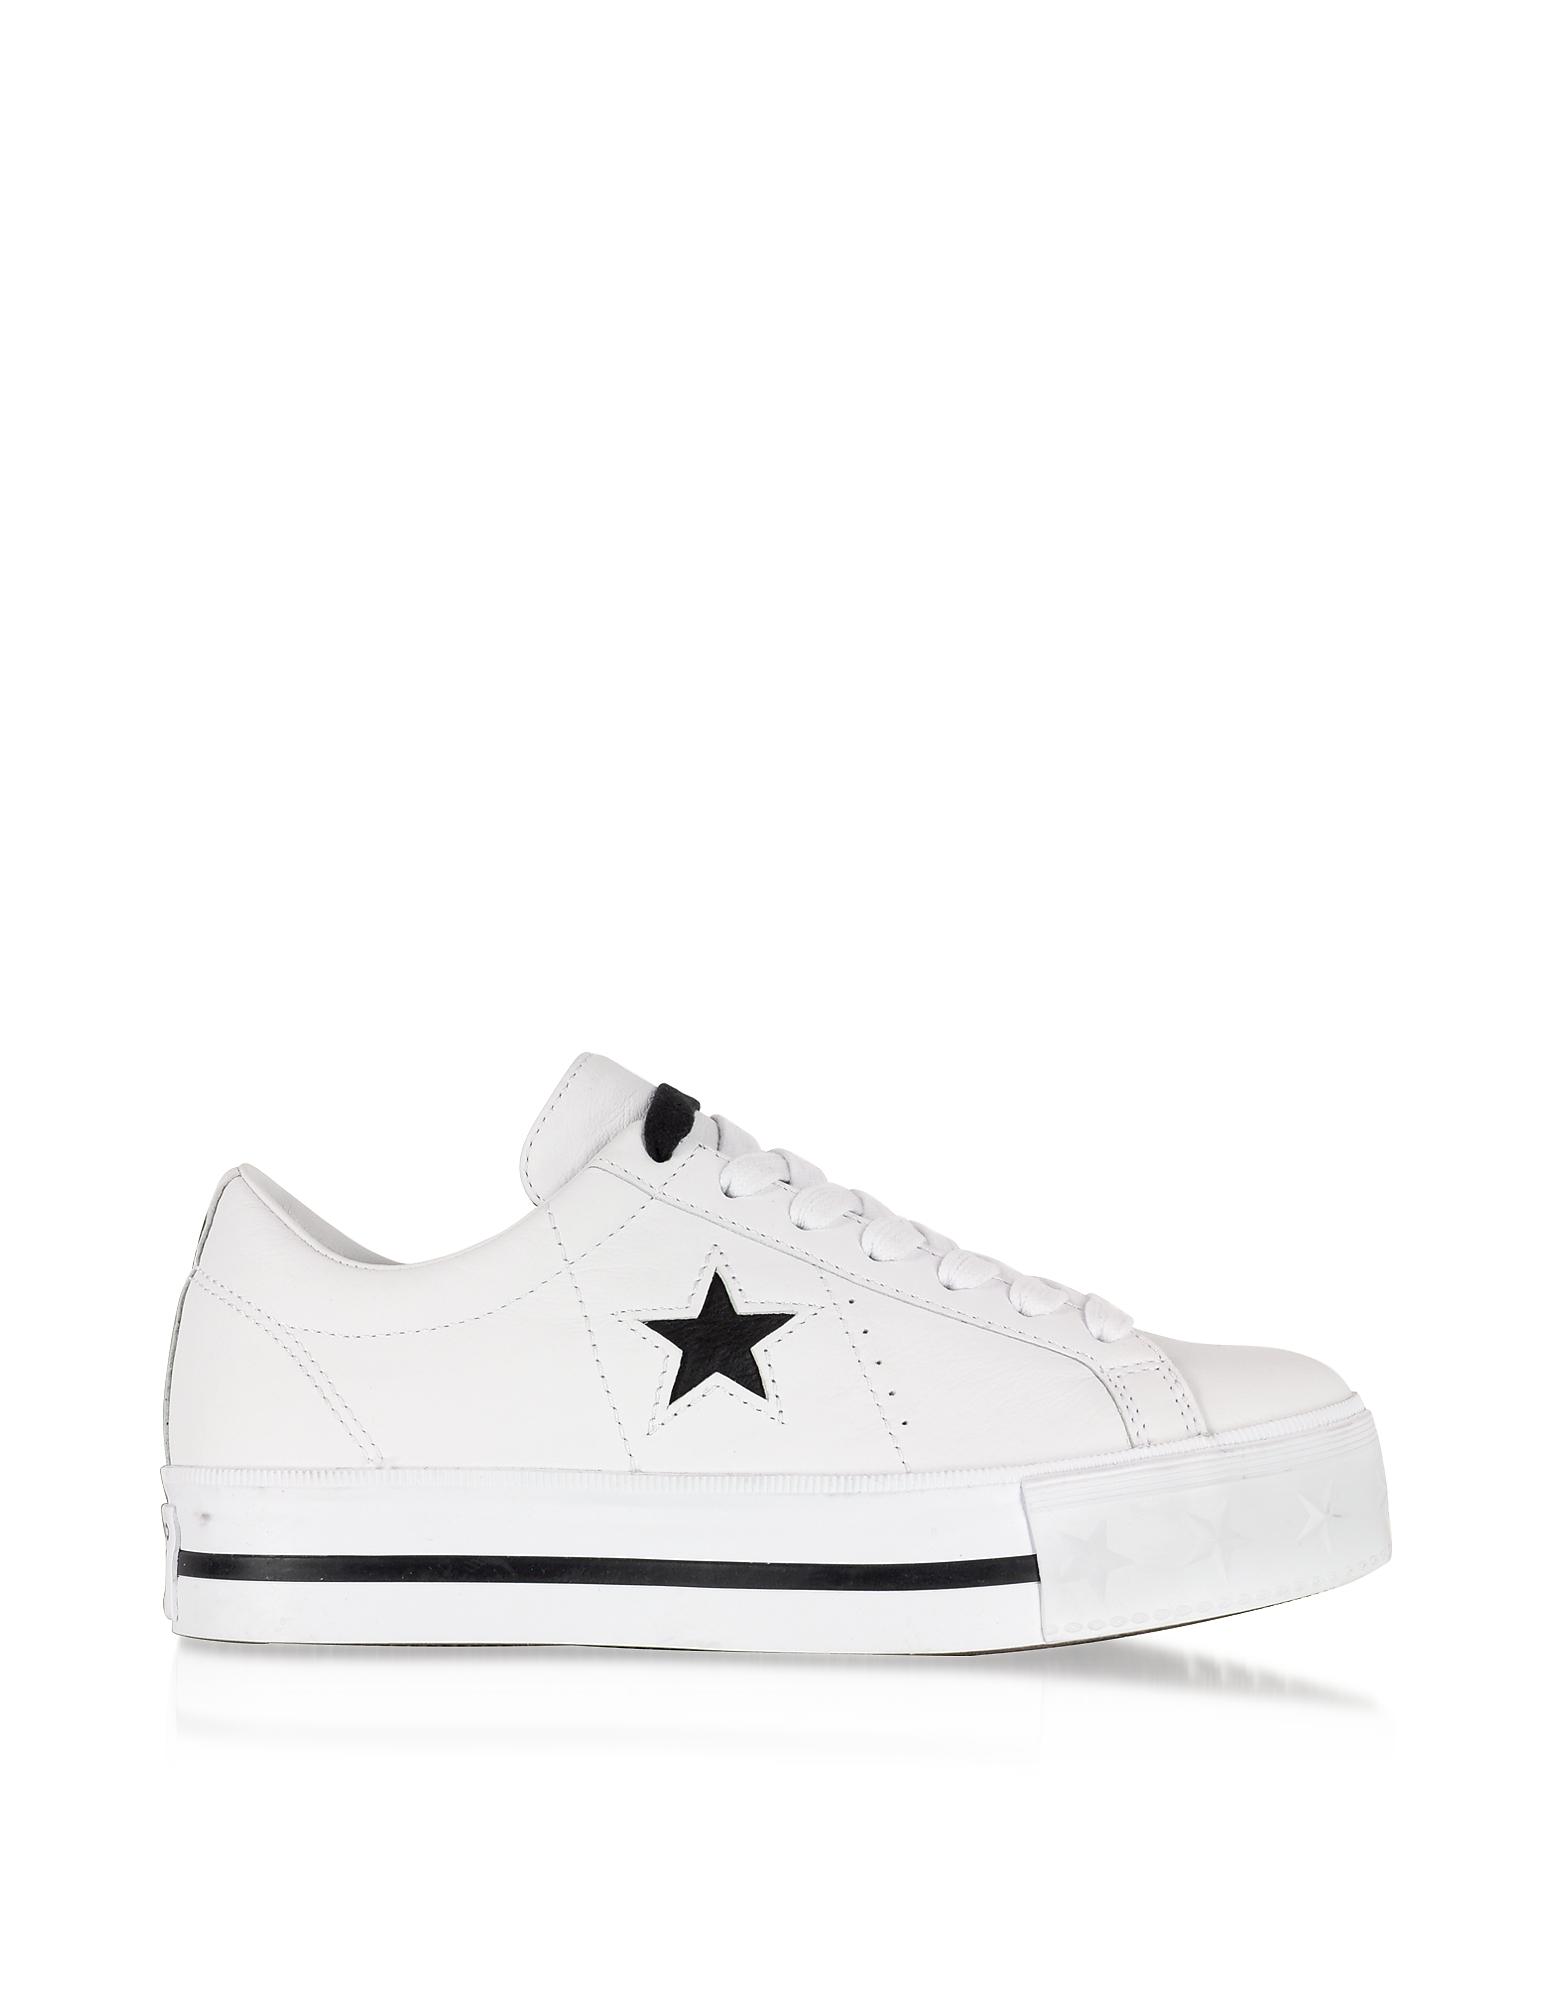 converse one star patent low top sneakers